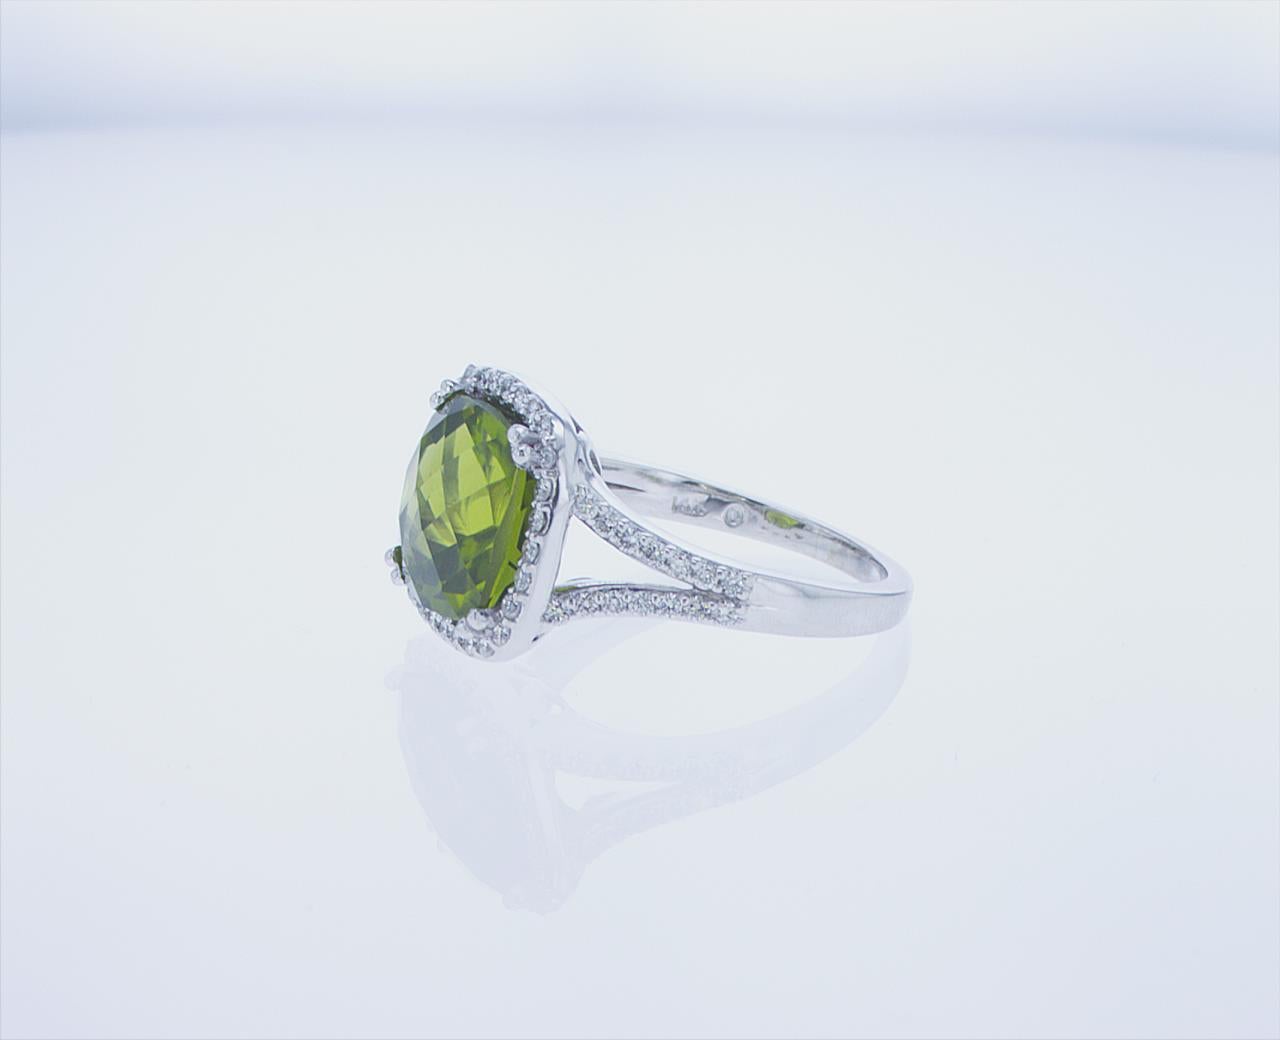 5.18ct Cushion Shape Peridot Cocktail Ring in 14k White Gold For Sale 2